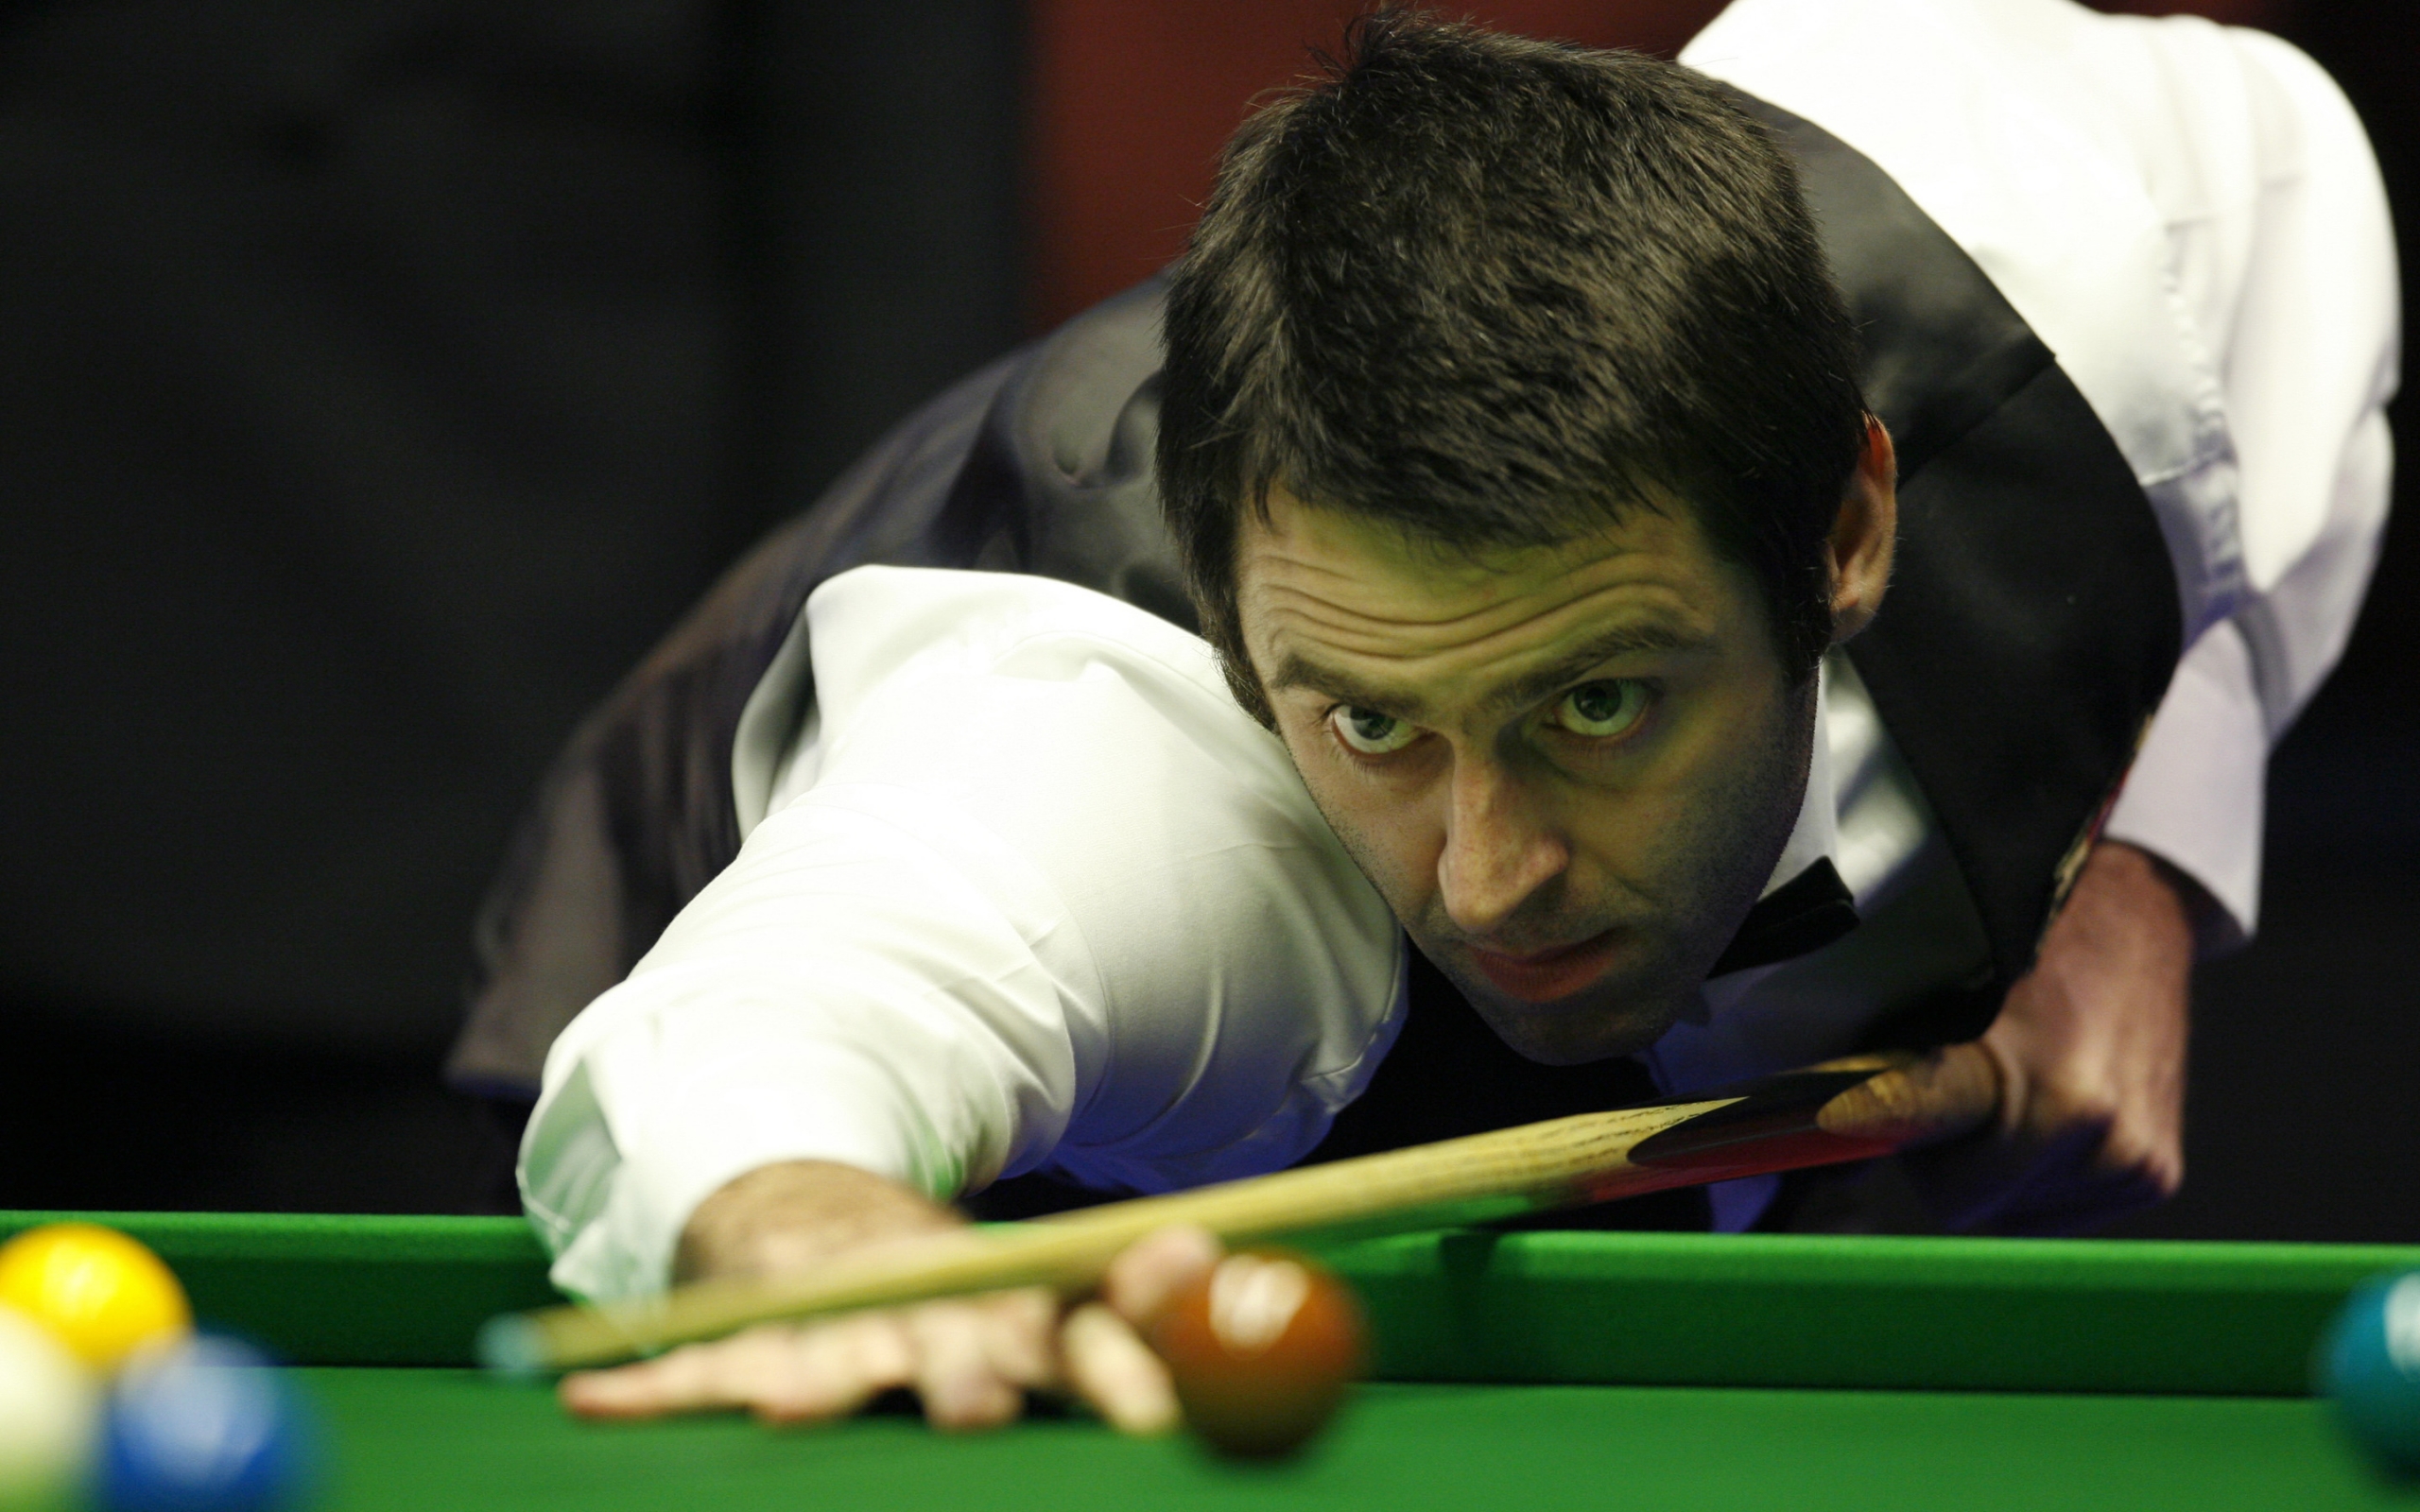 Snooker Pool Balls Pool Table Ronnie OSullivan Men Suits Sport Ball Depth Of Field England Looking A 2560x1600